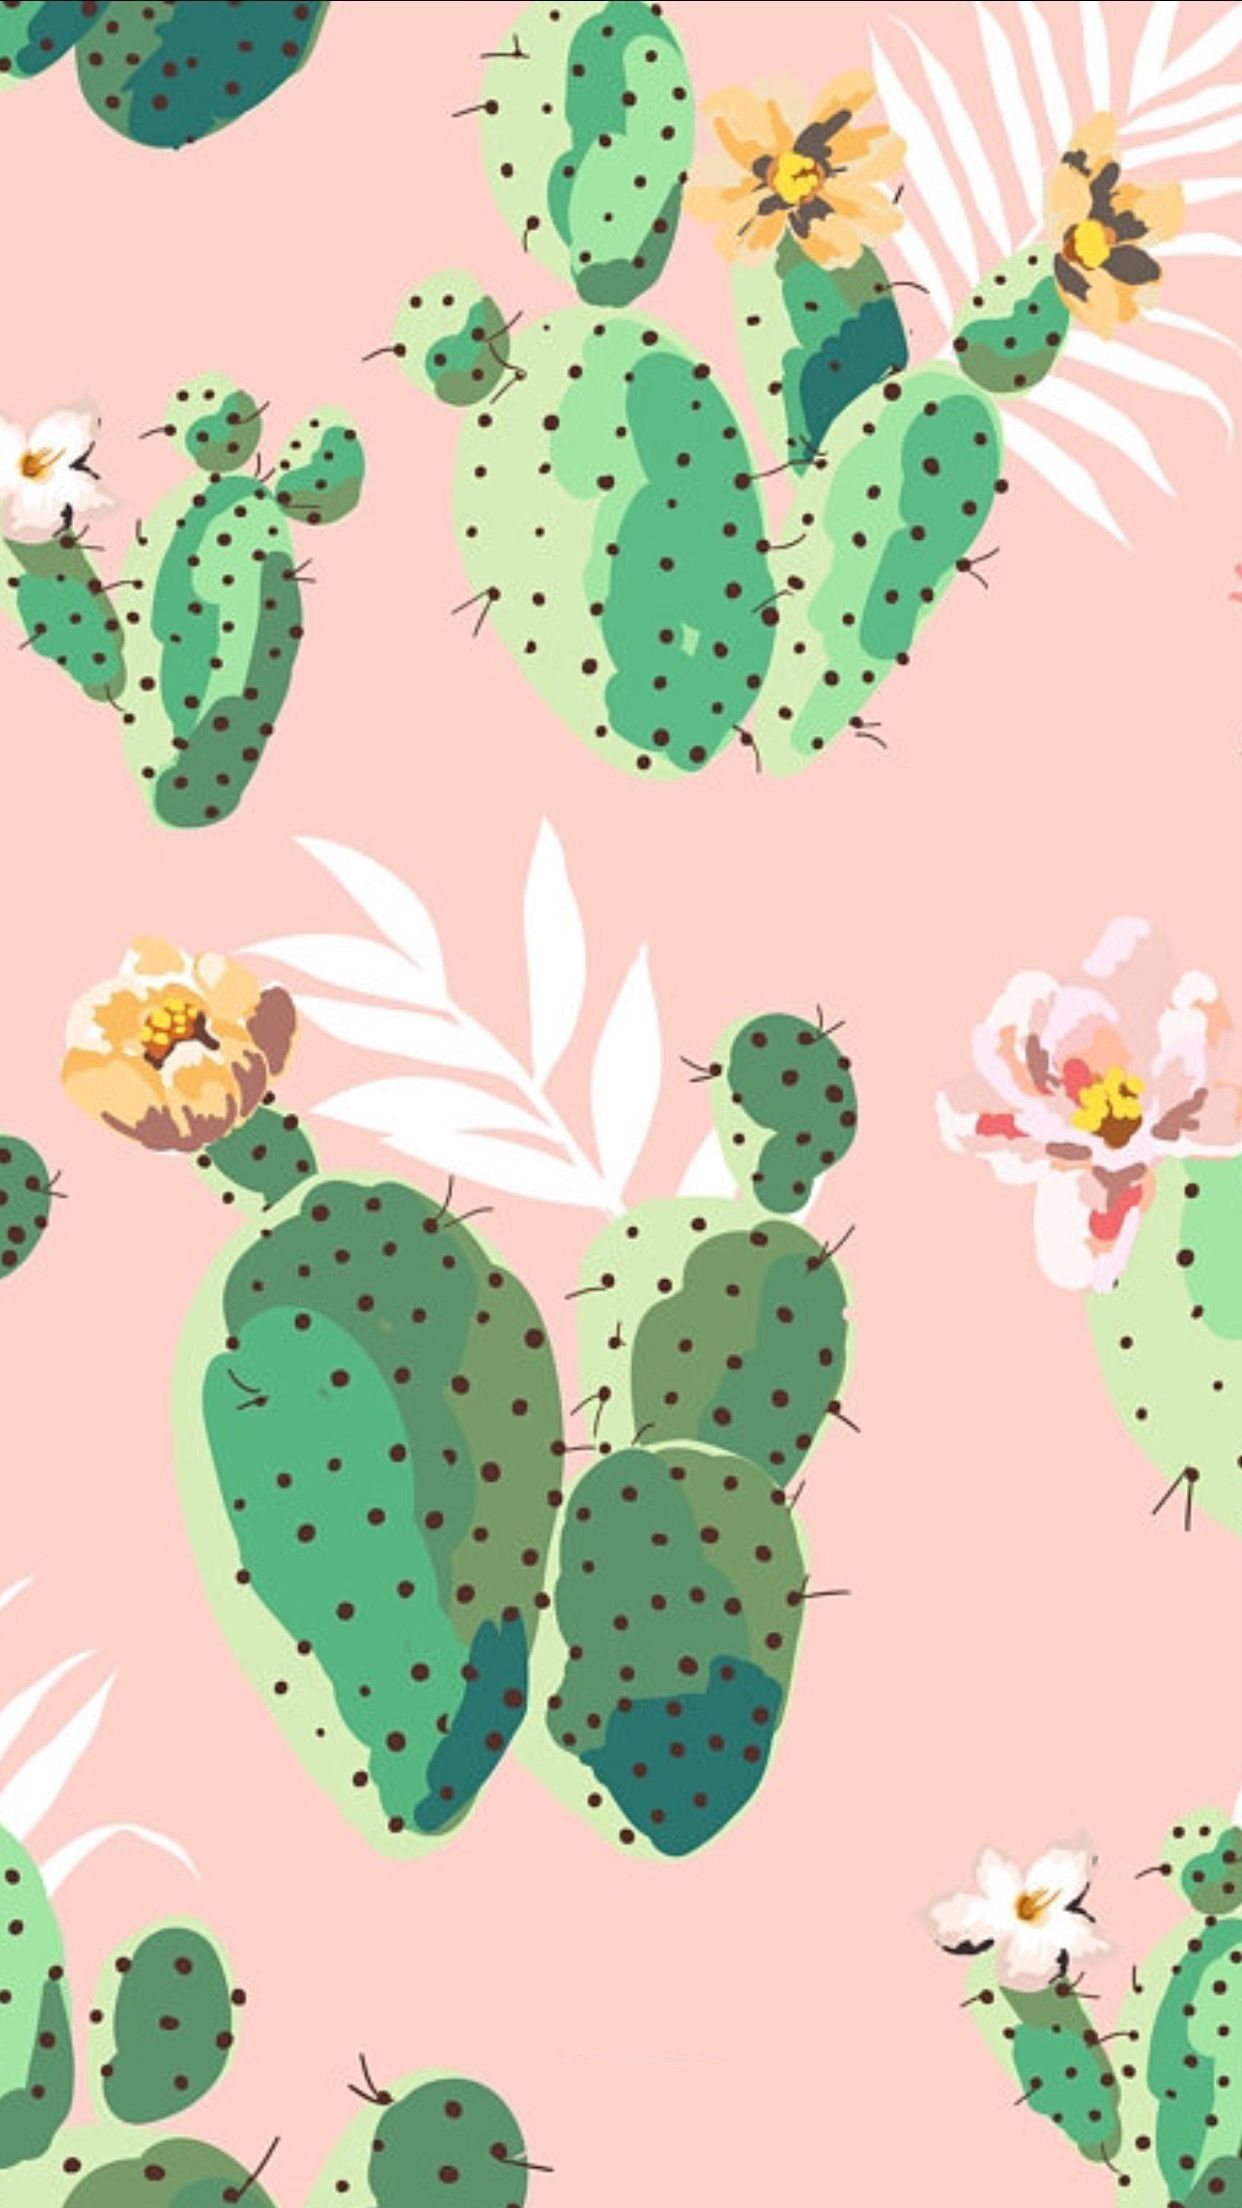 A pattern of cactus flowers and leaves - Cactus